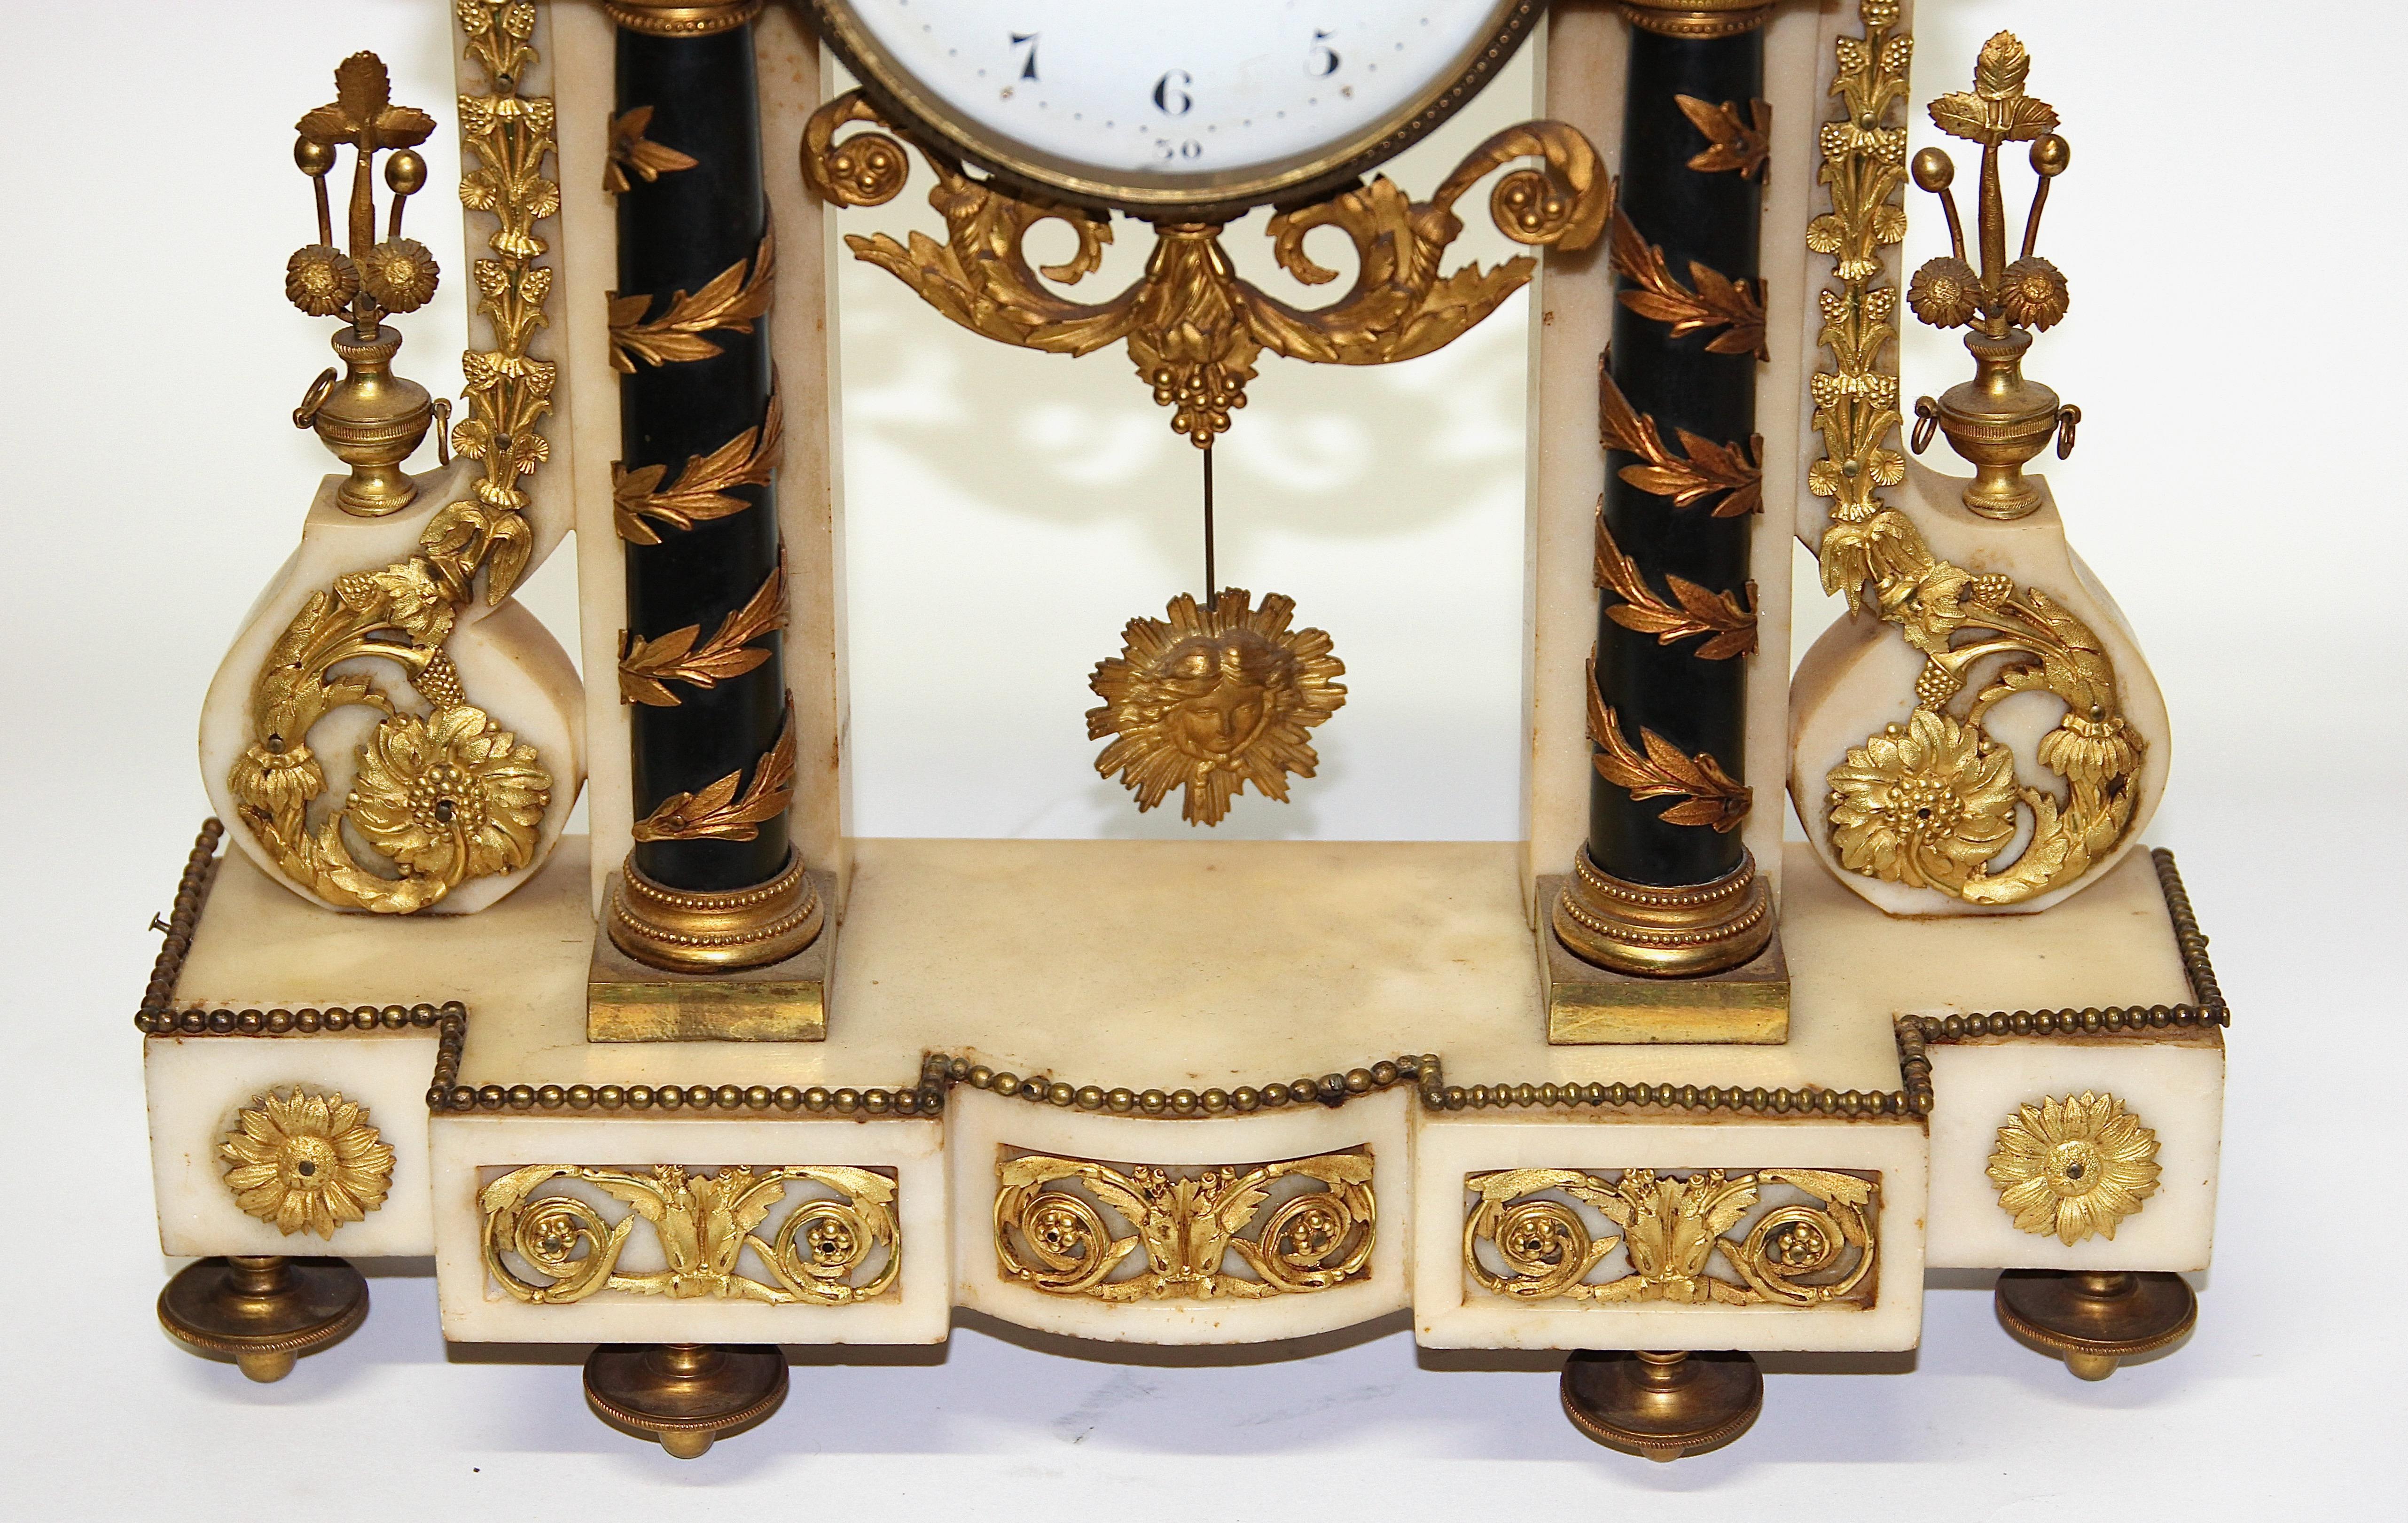 French Empire Ormolu Mantel Clock by Deverberie a Paris, Fire-Gilded In Fair Condition For Sale In Berlin, DE